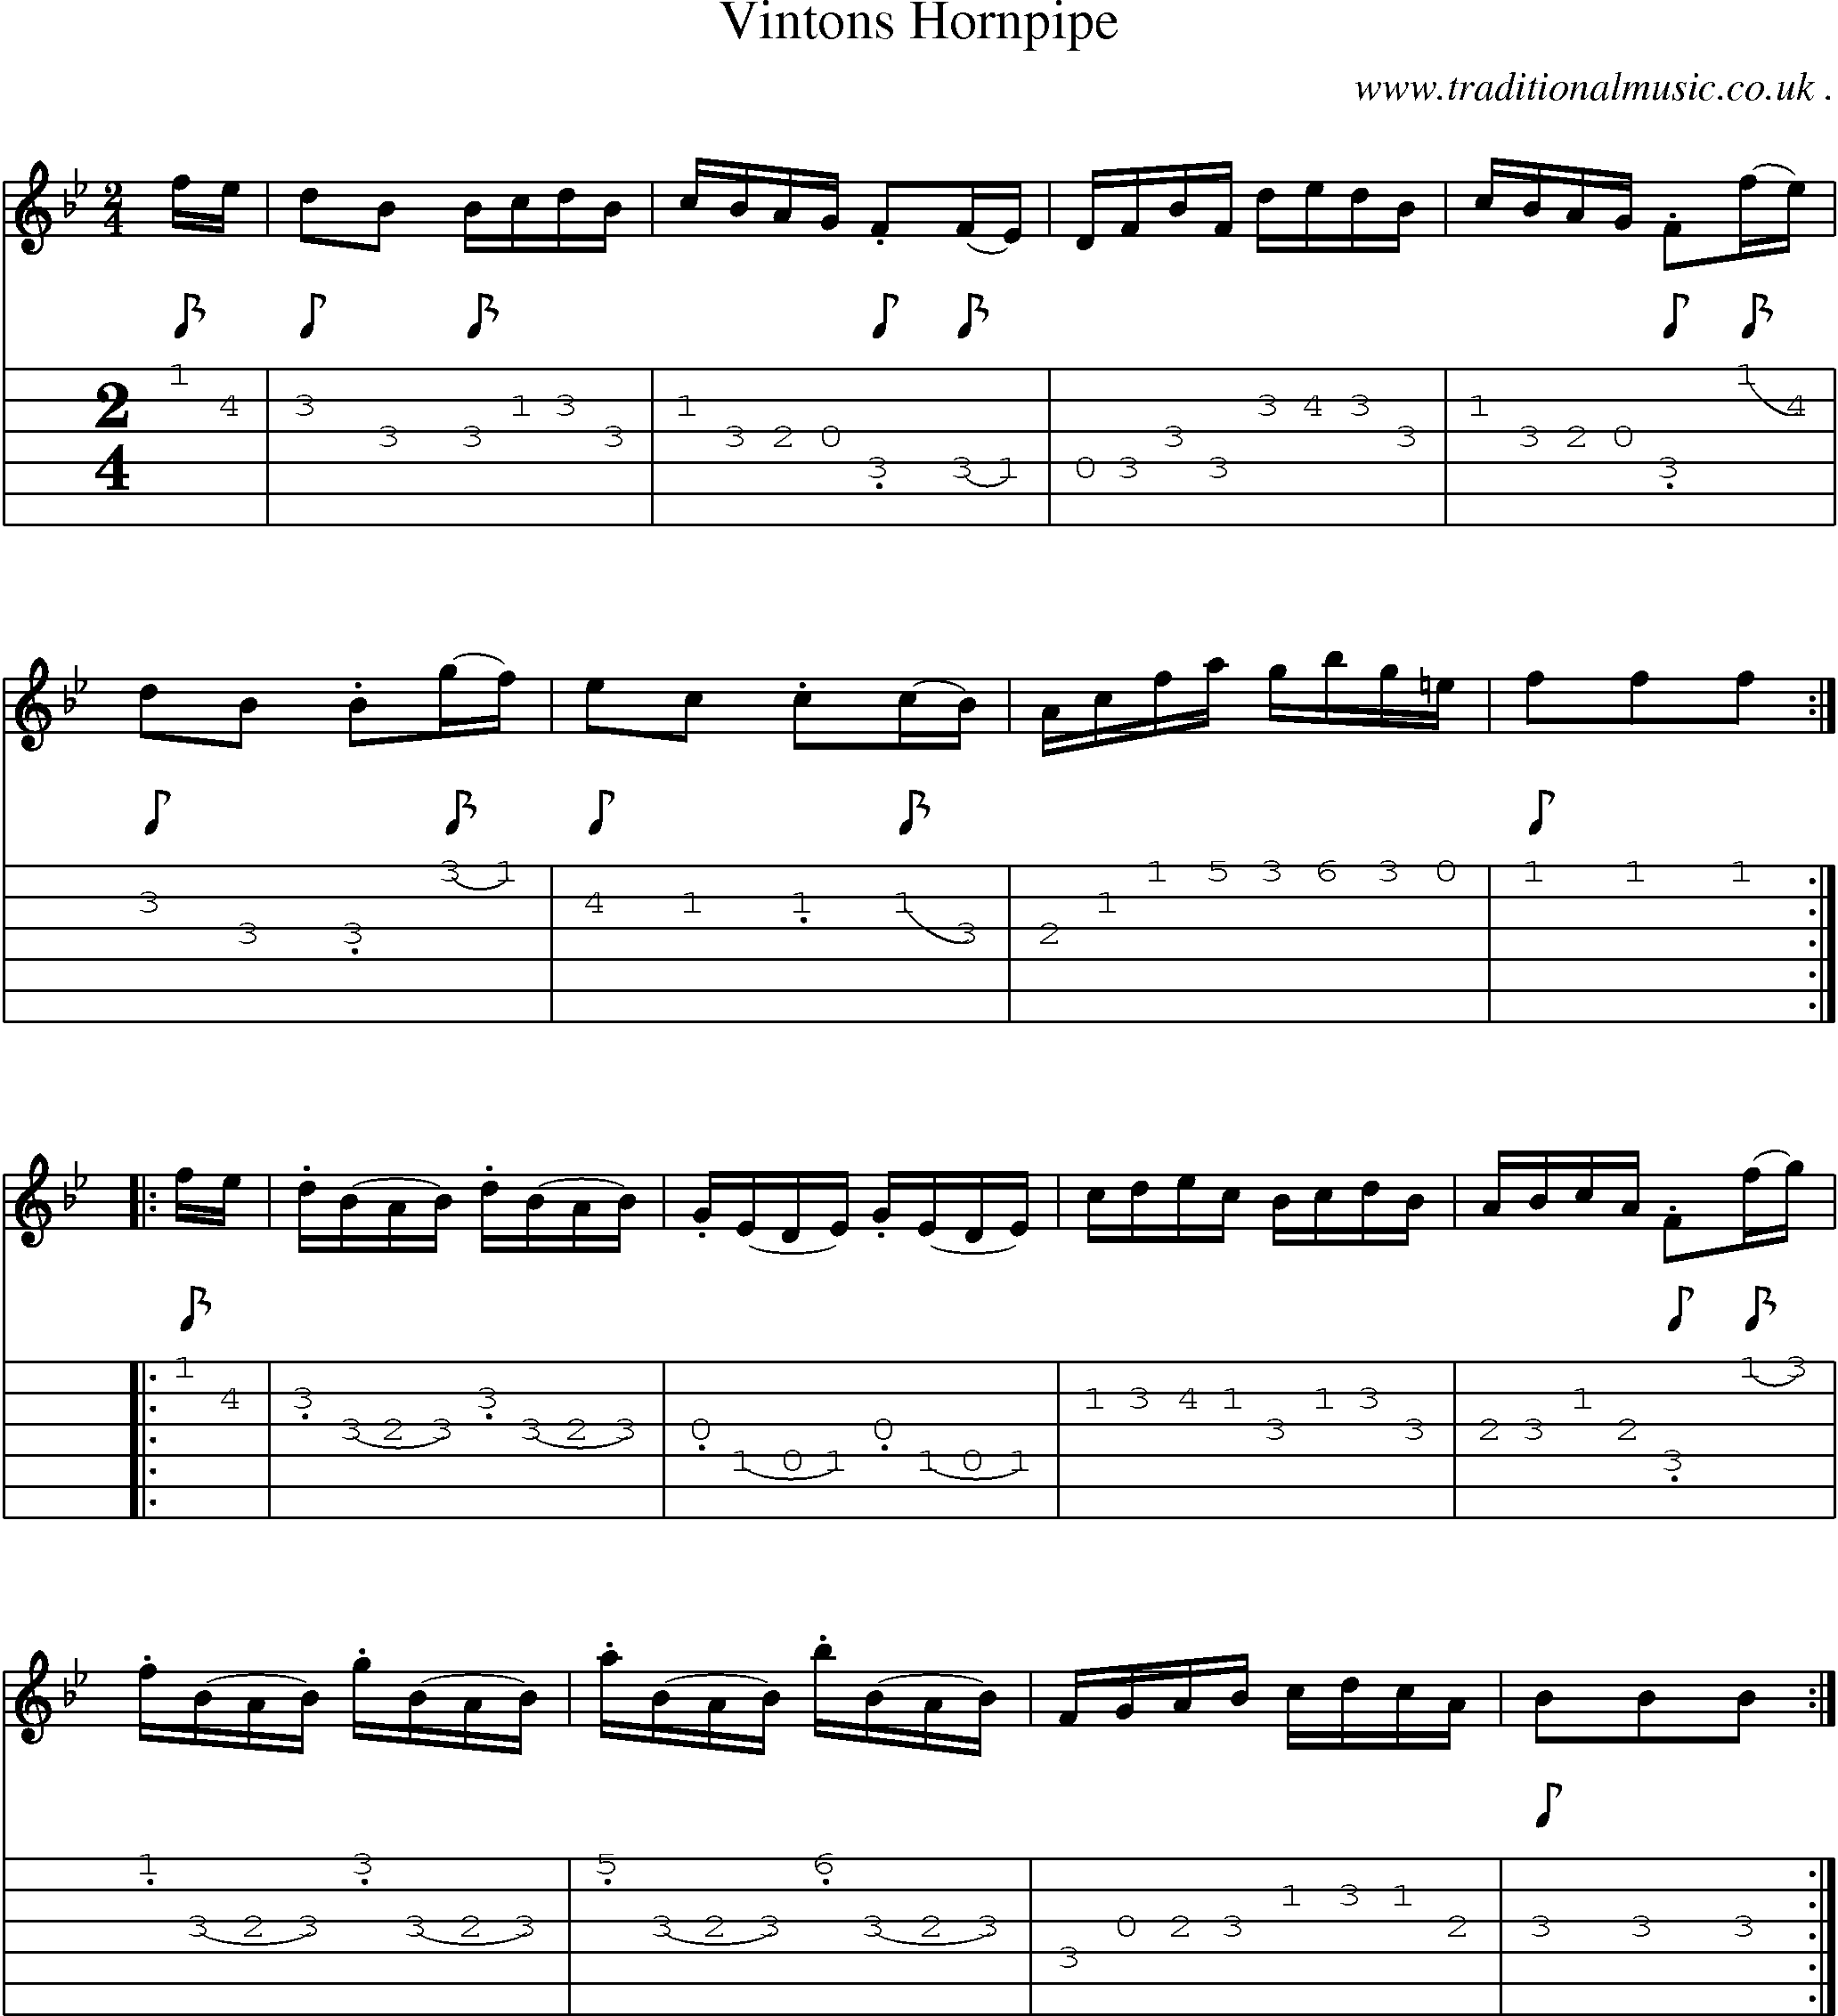 Sheet-Music and Guitar Tabs for Vintons Hornpipe